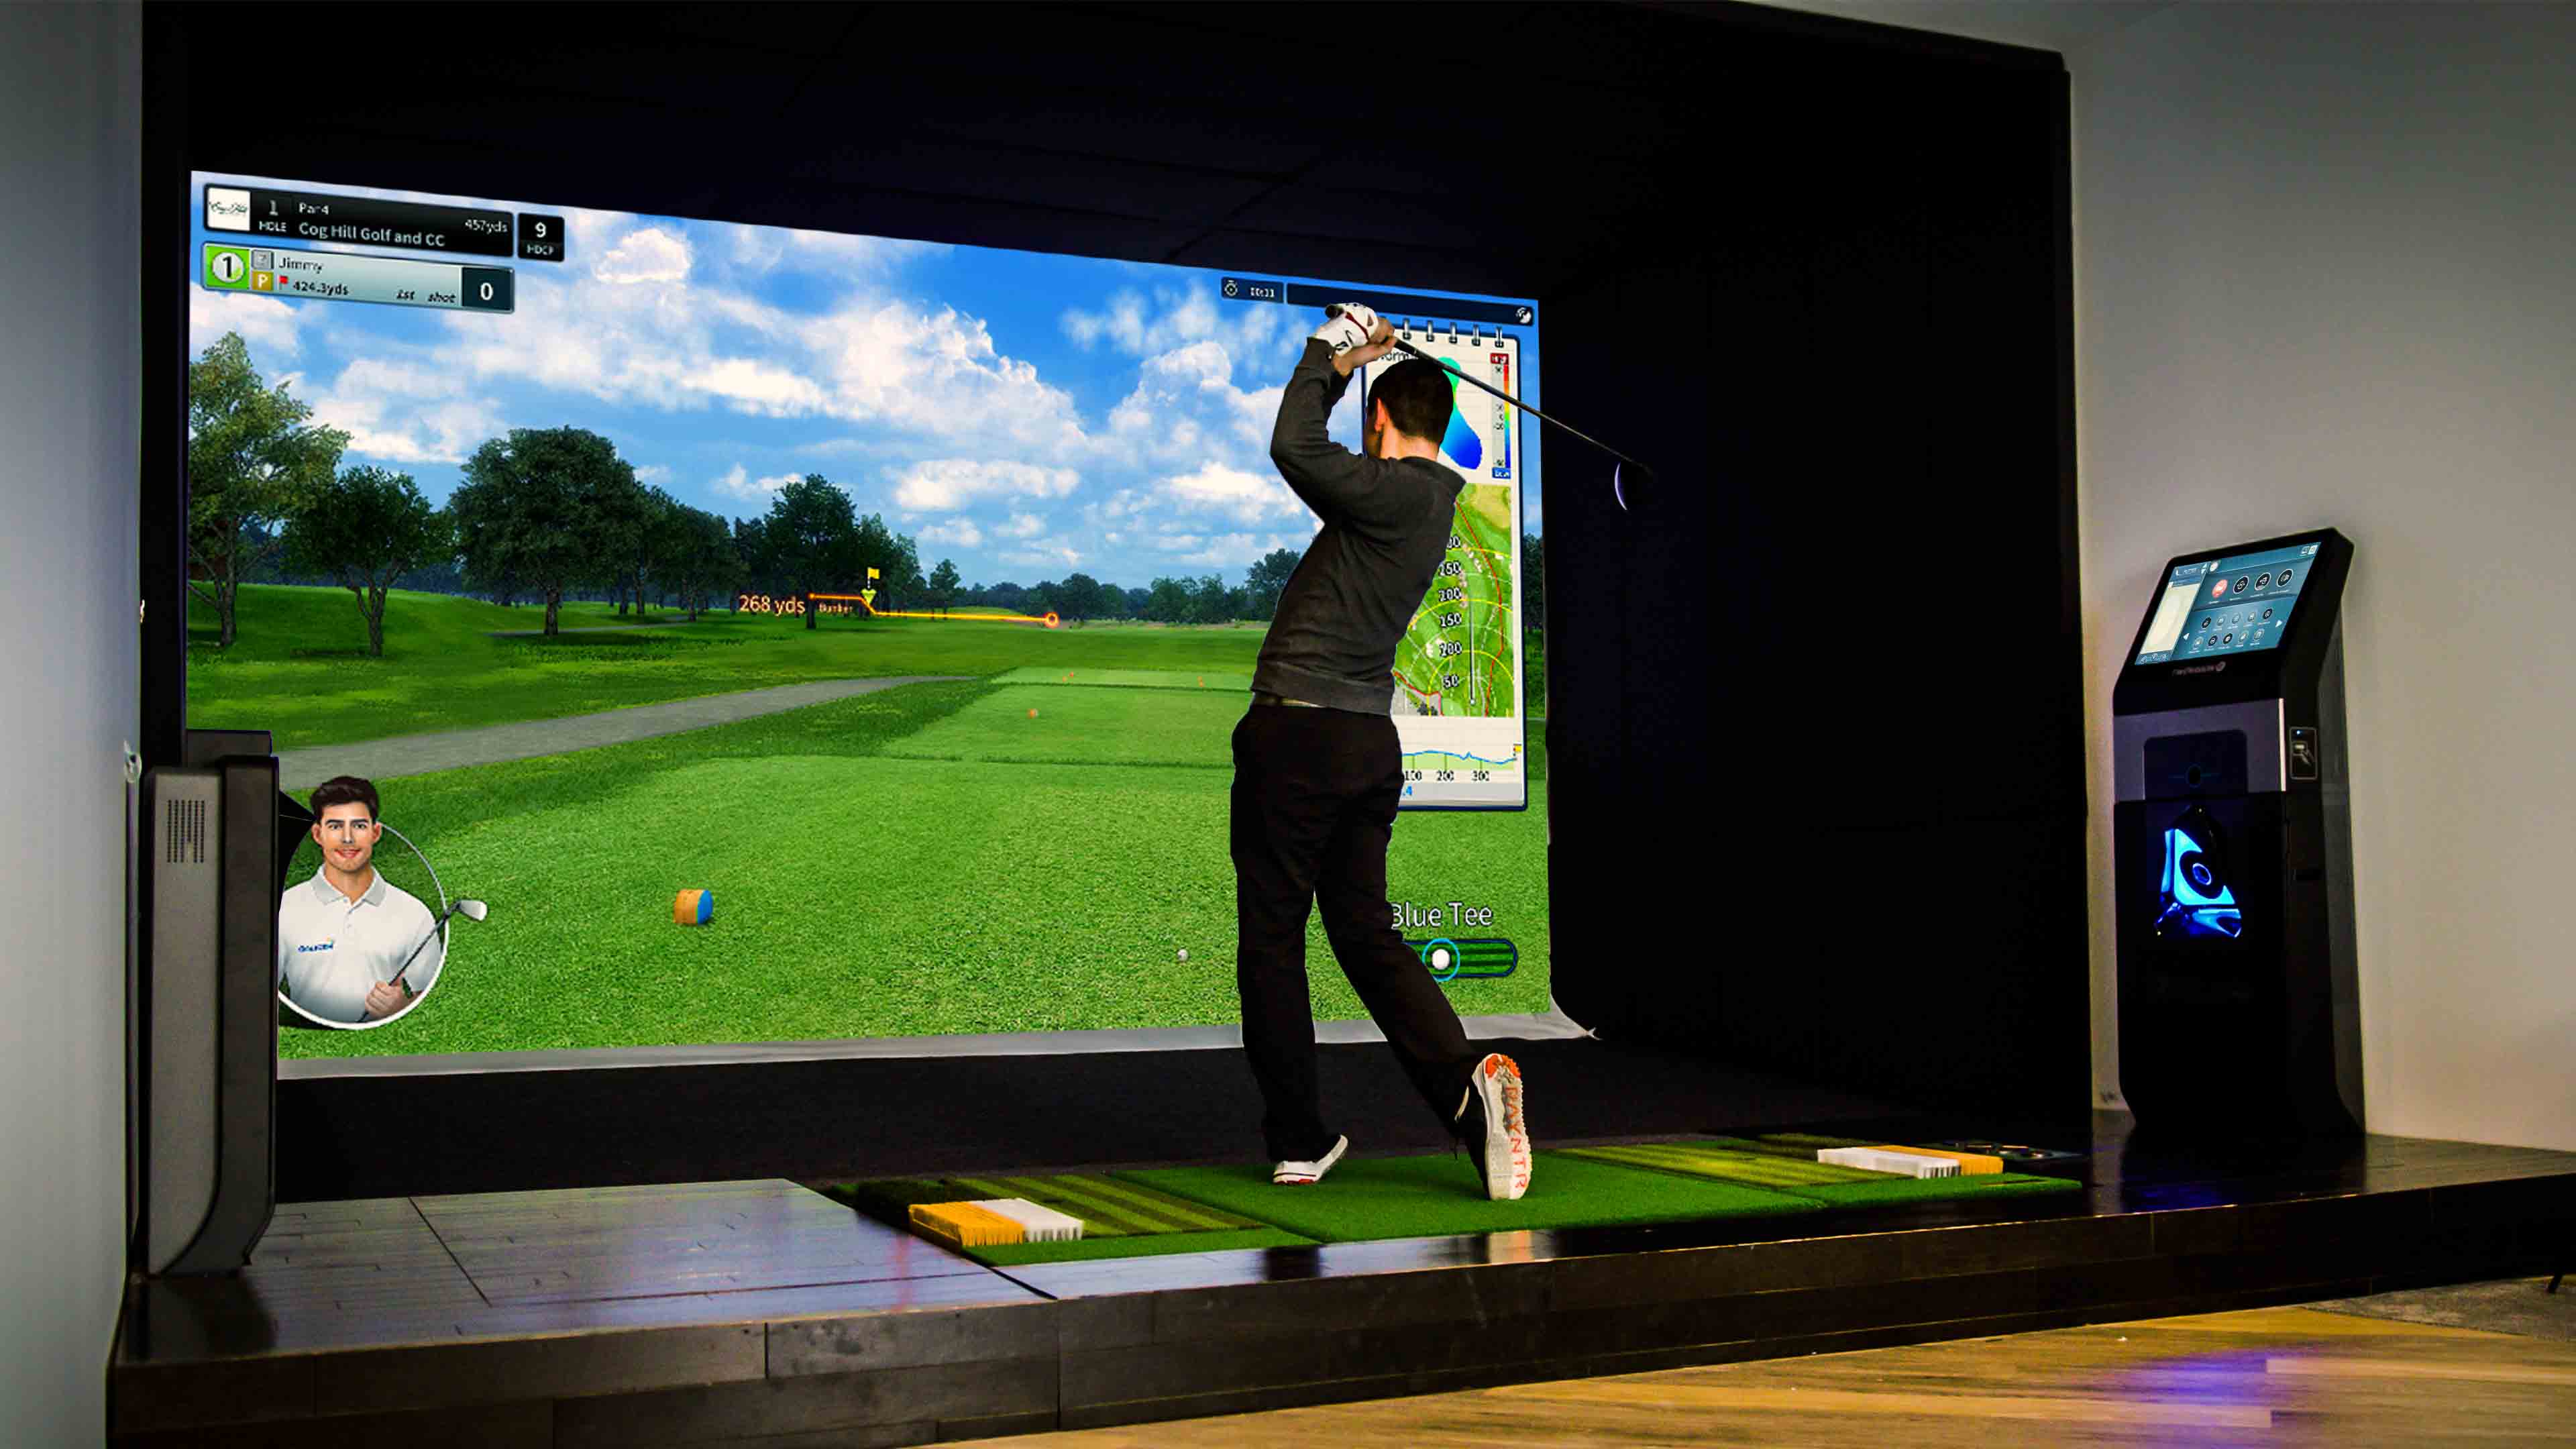 Man swinging a golf club while playing Golfzon TwoVision indoor golf simulator